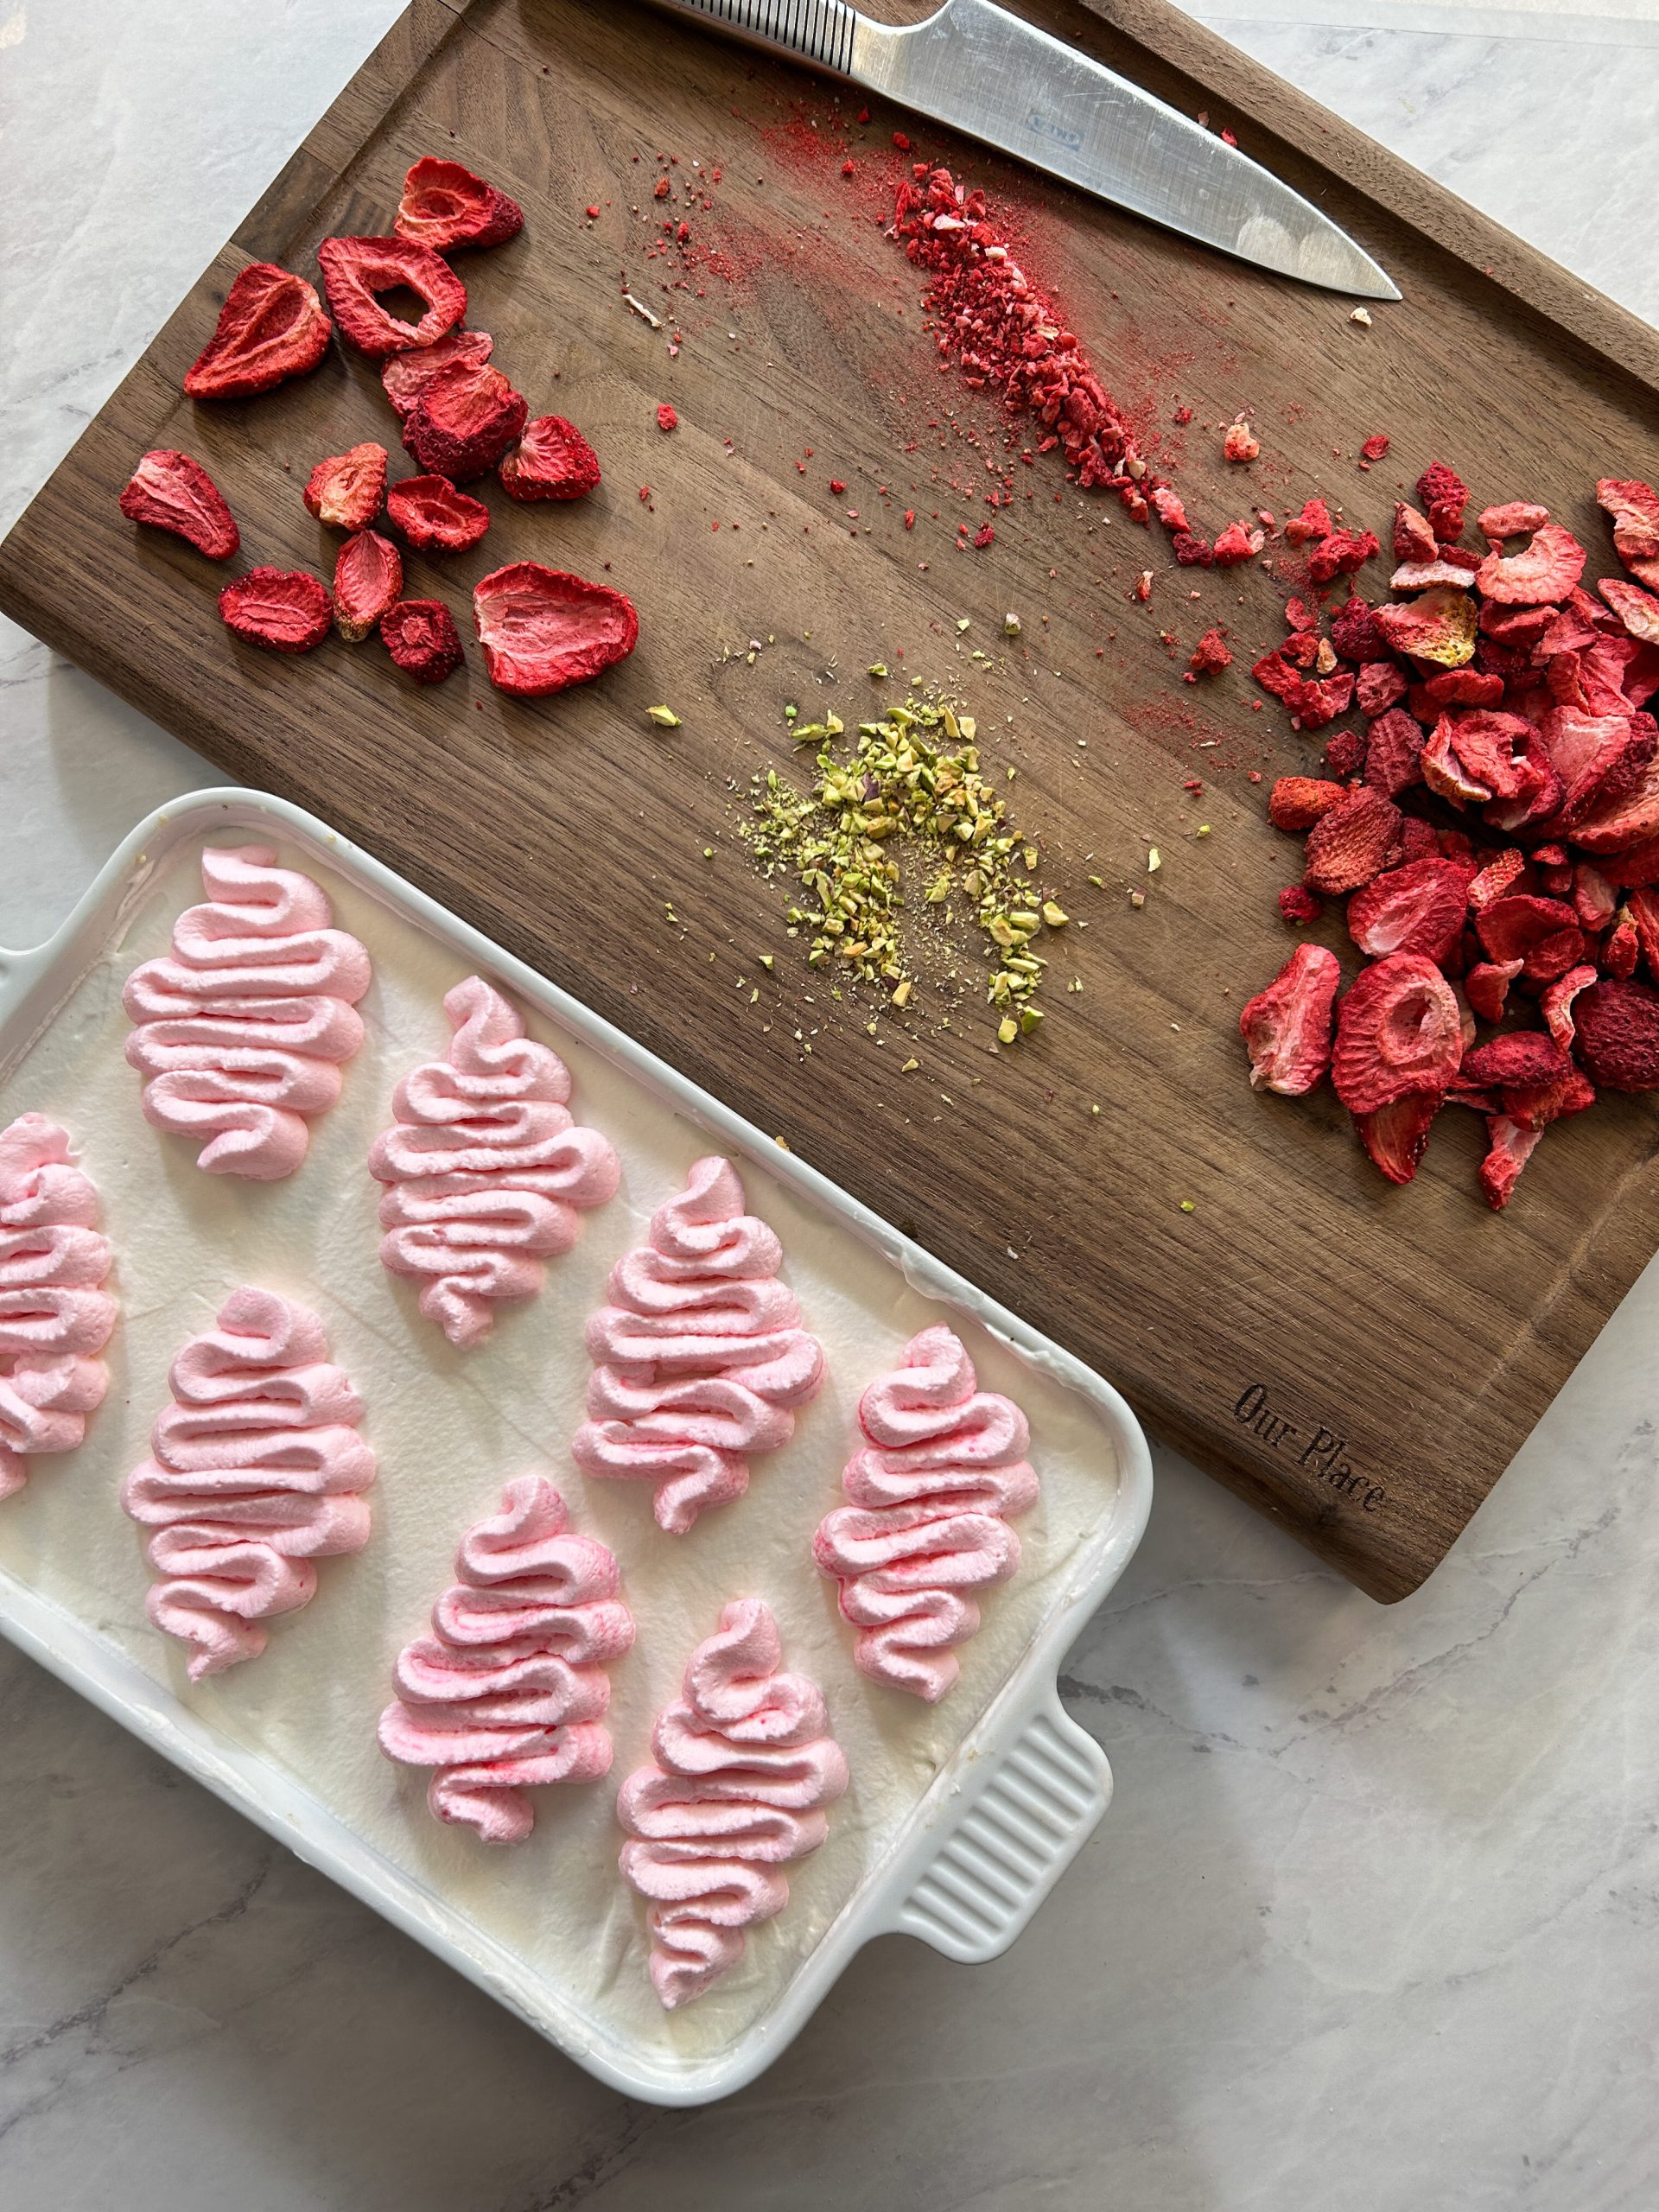 overhead picture showing a dish with tres leches cake next to a cutting board with chopped freeze dried strawberries and pistachios